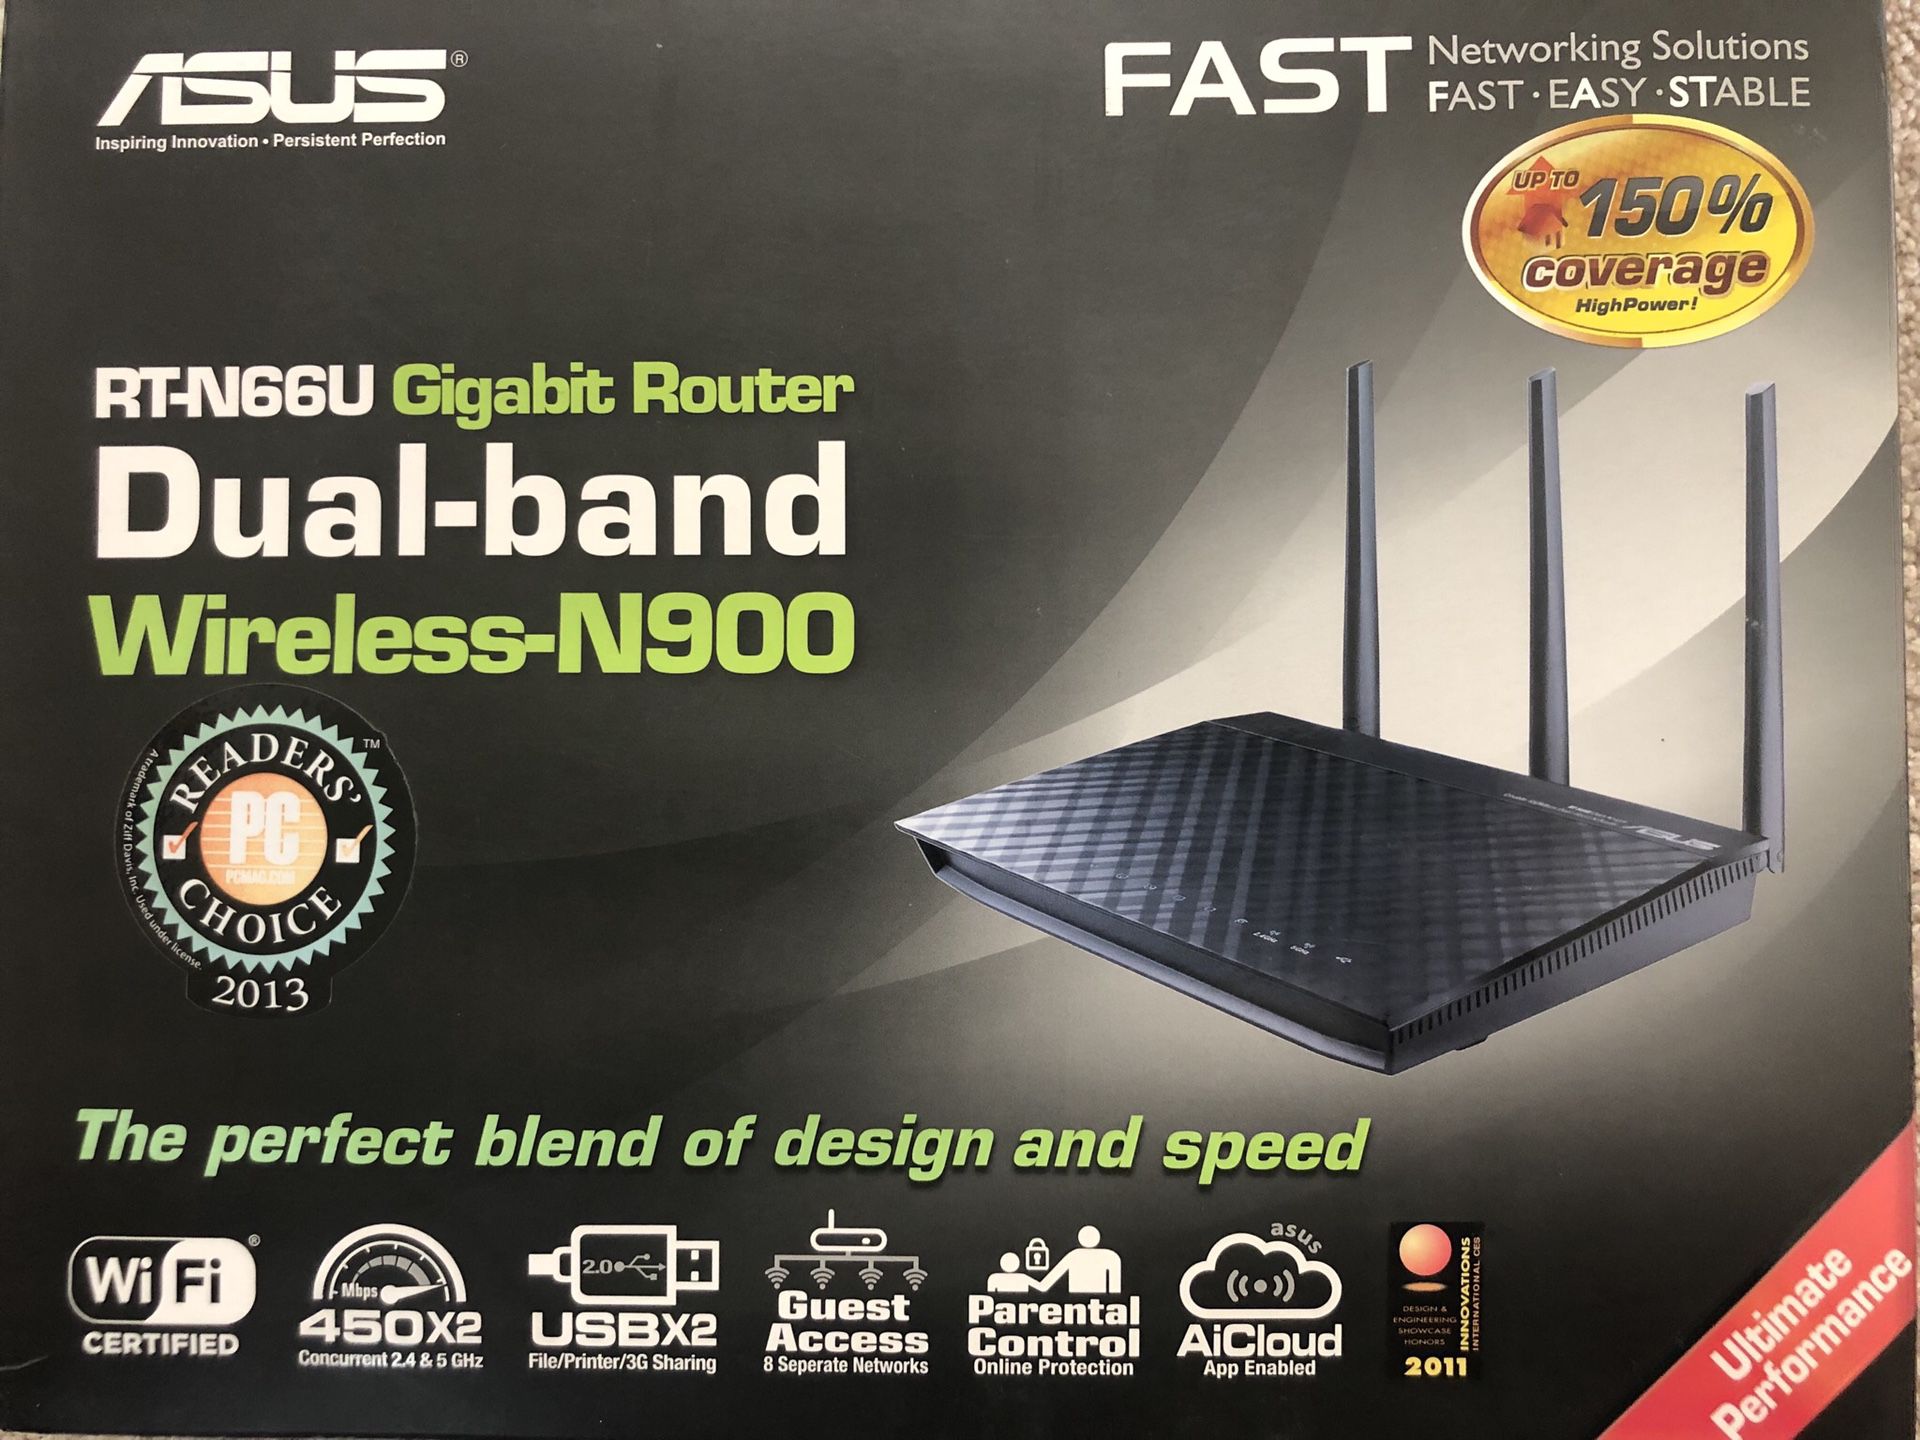 Asus Dual-band Wireless Gigabit Router